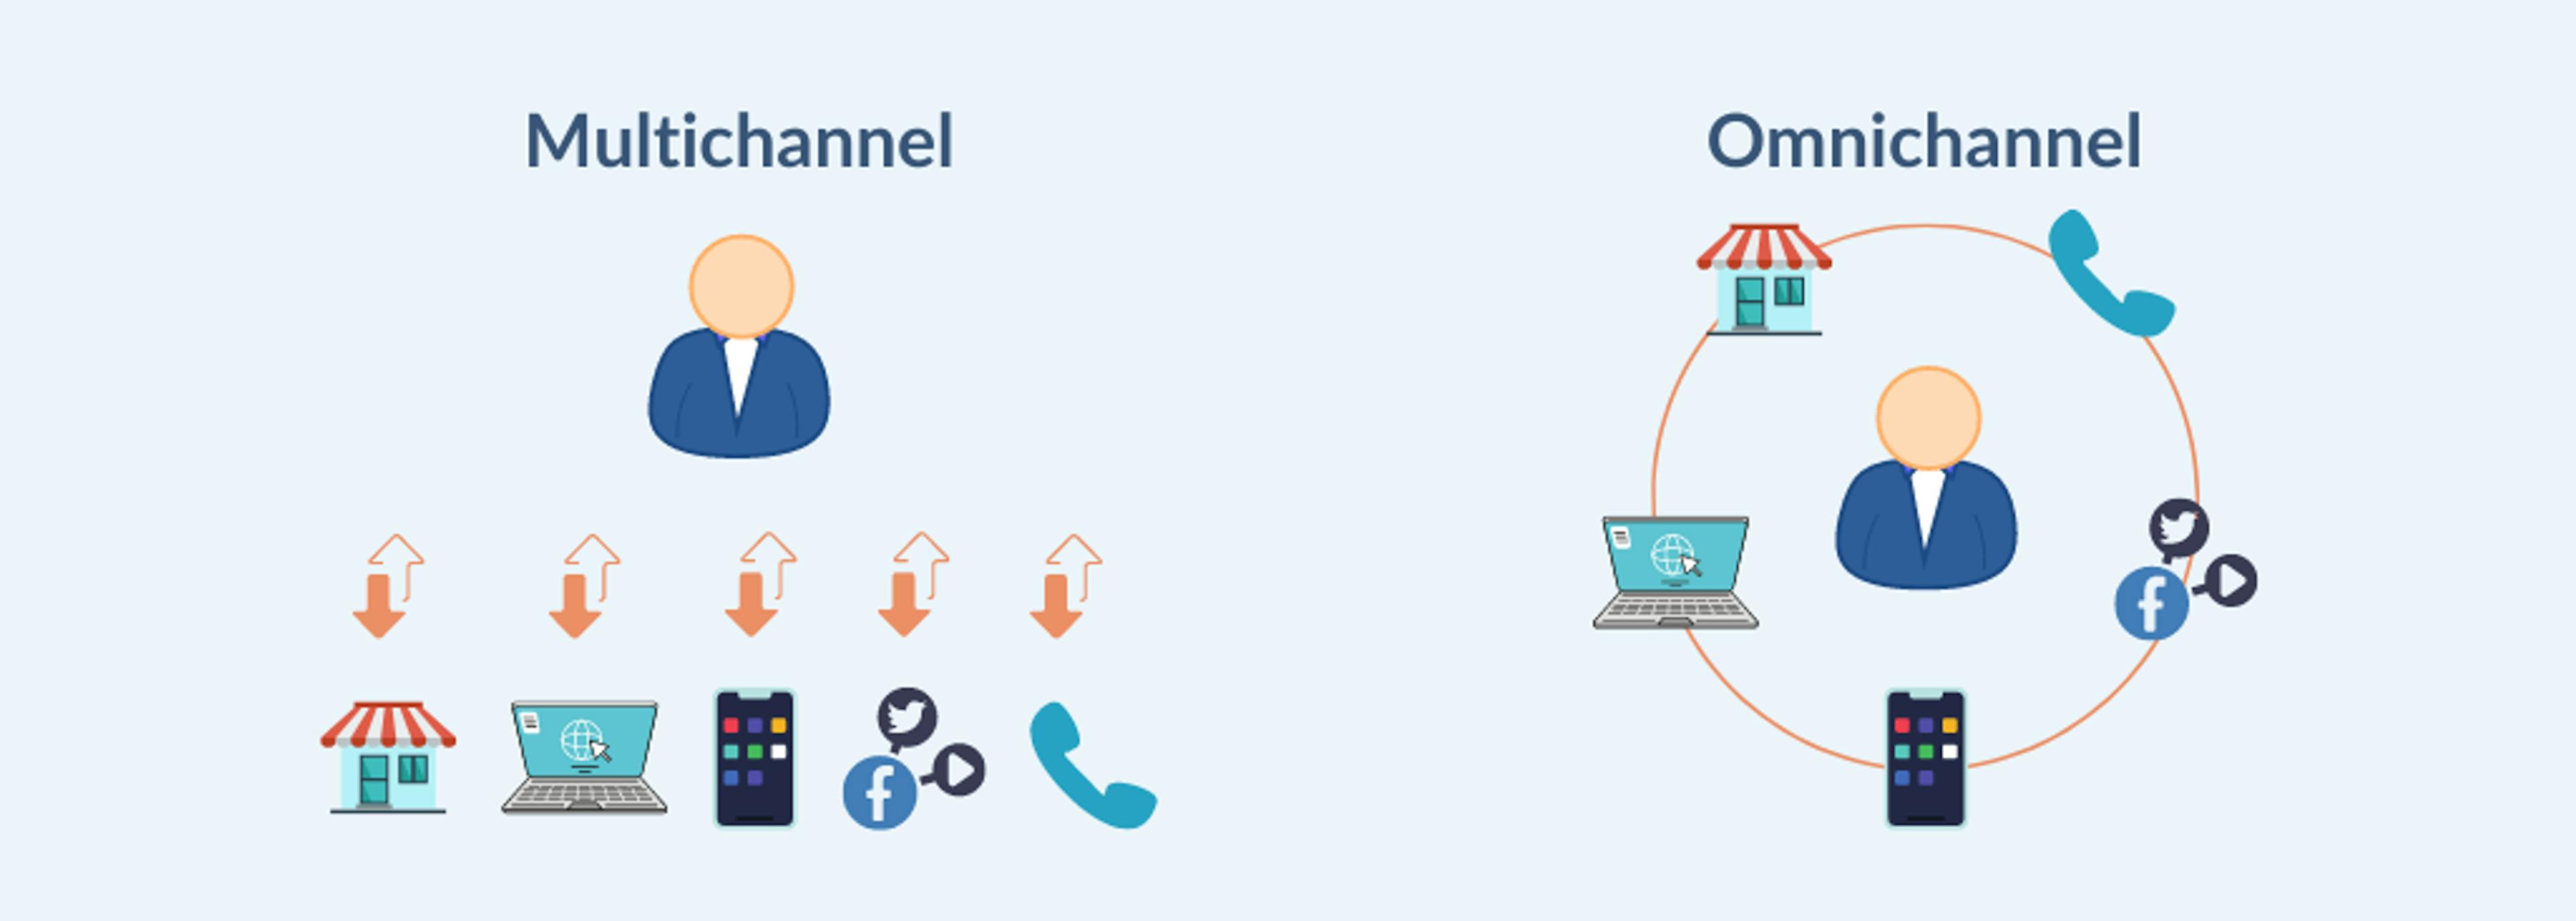 An image of multichannel and omnichannel